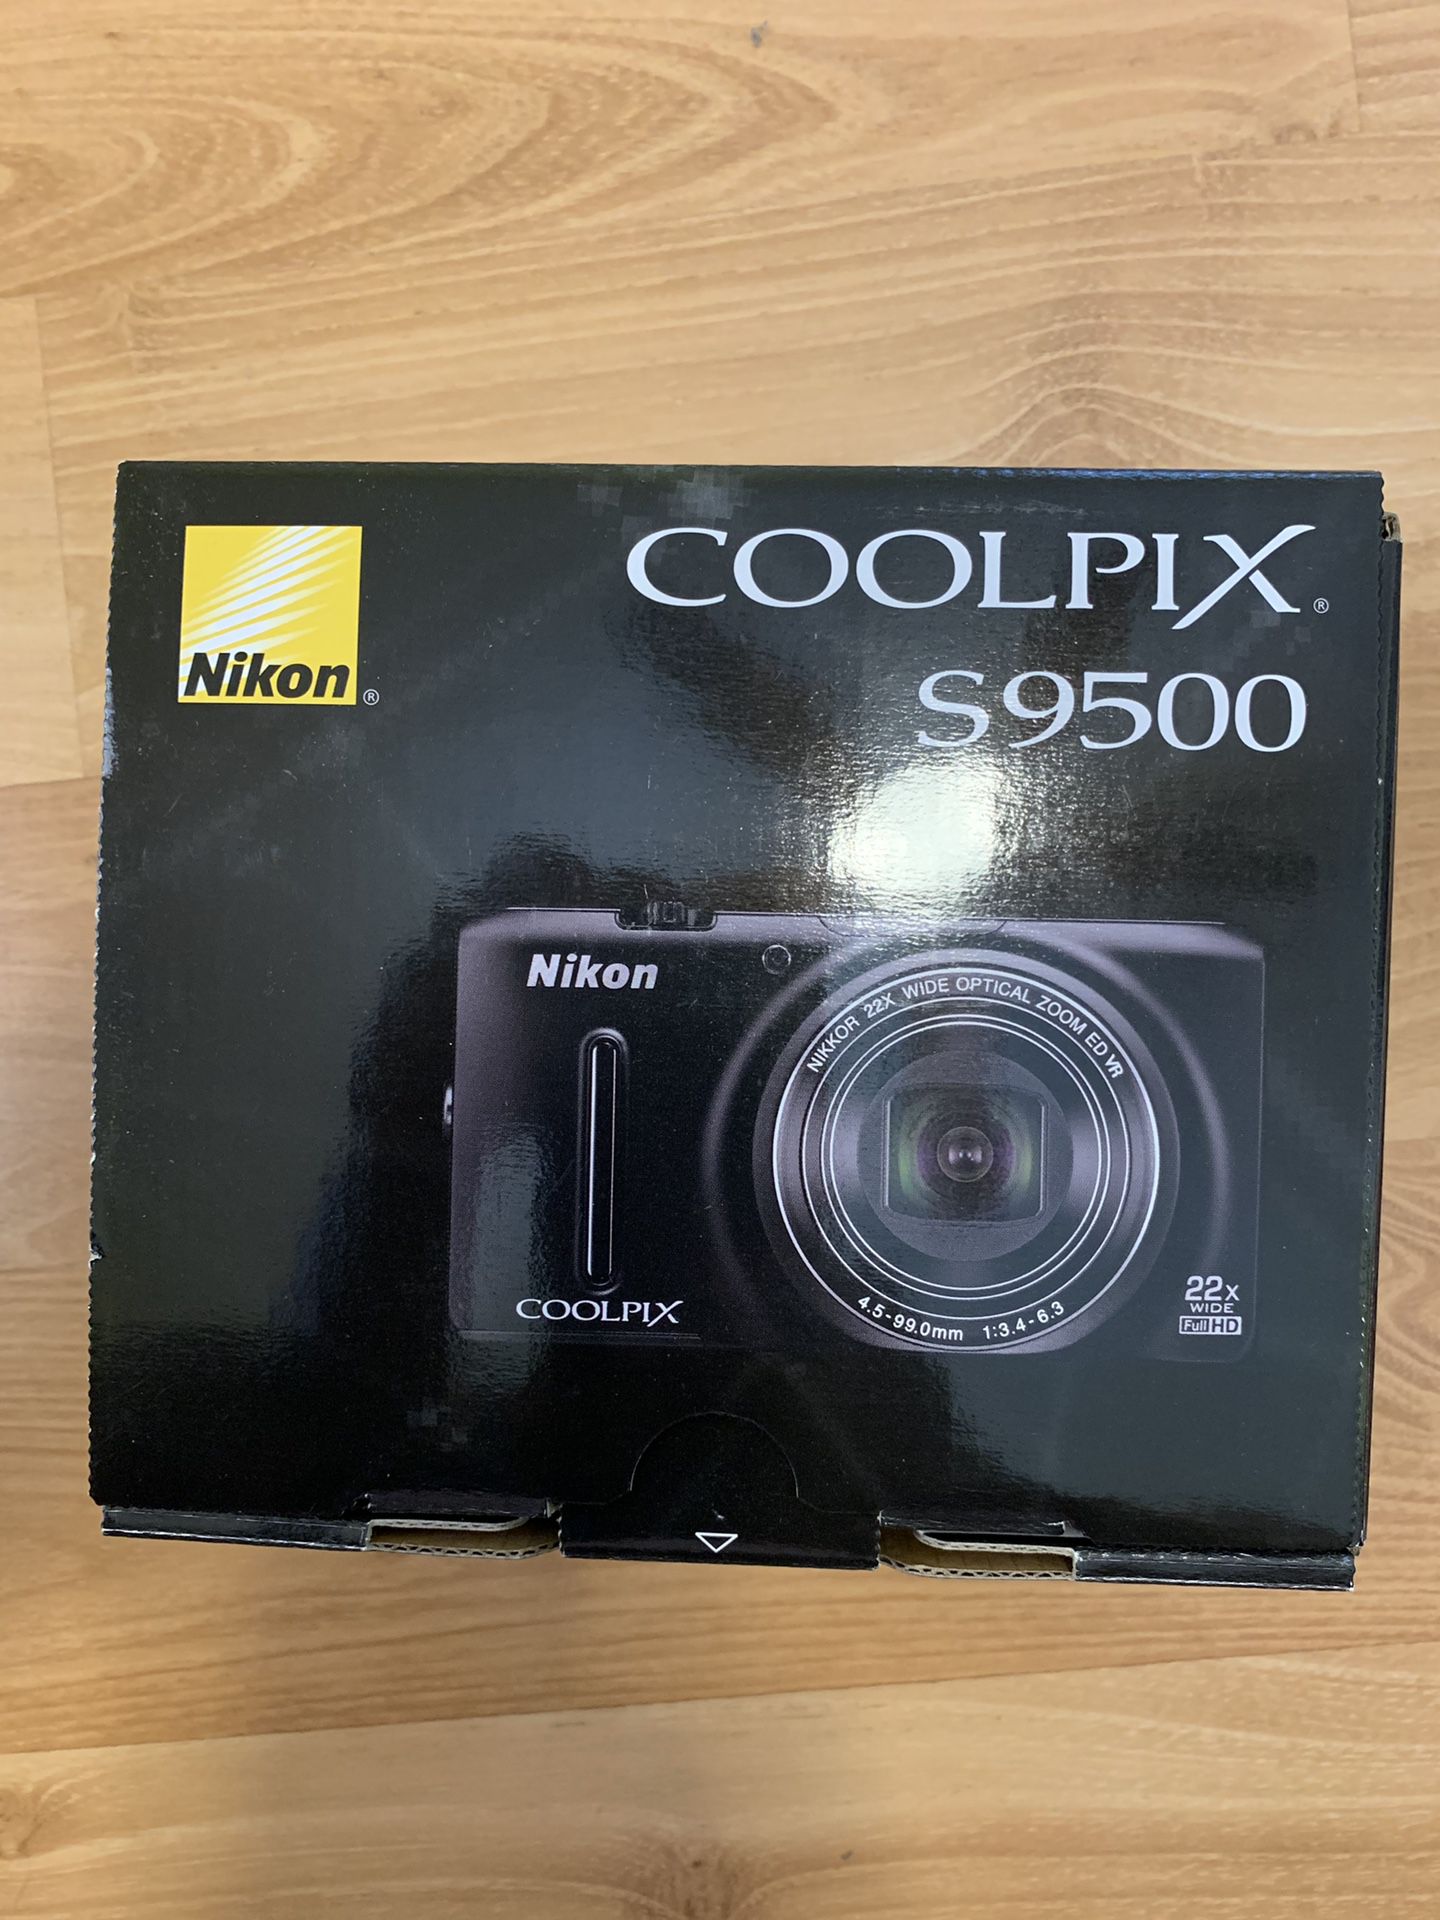 Nikon coolpix S9500, brand new condition! Everything included. $125 OBO